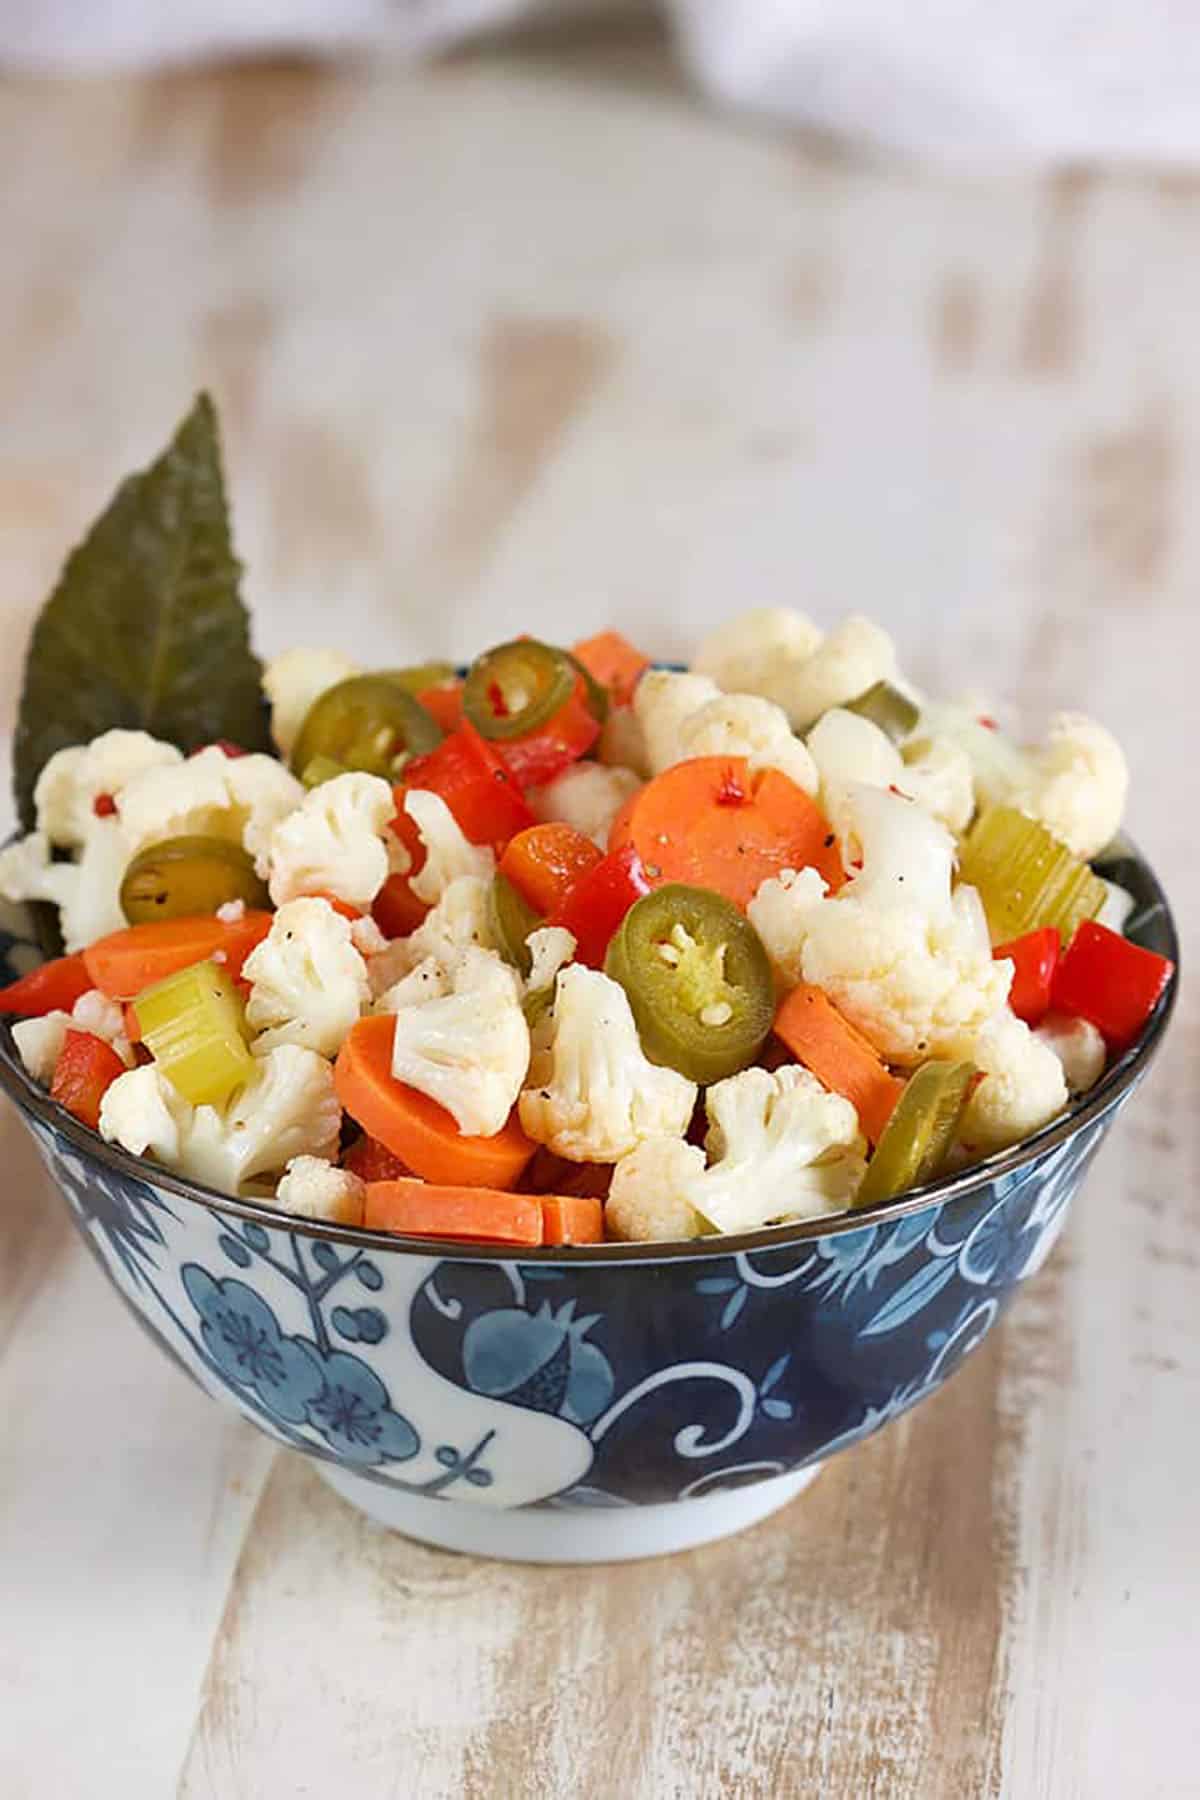 Giardiniera in a blue and white bowl with a bay leaf on the side.